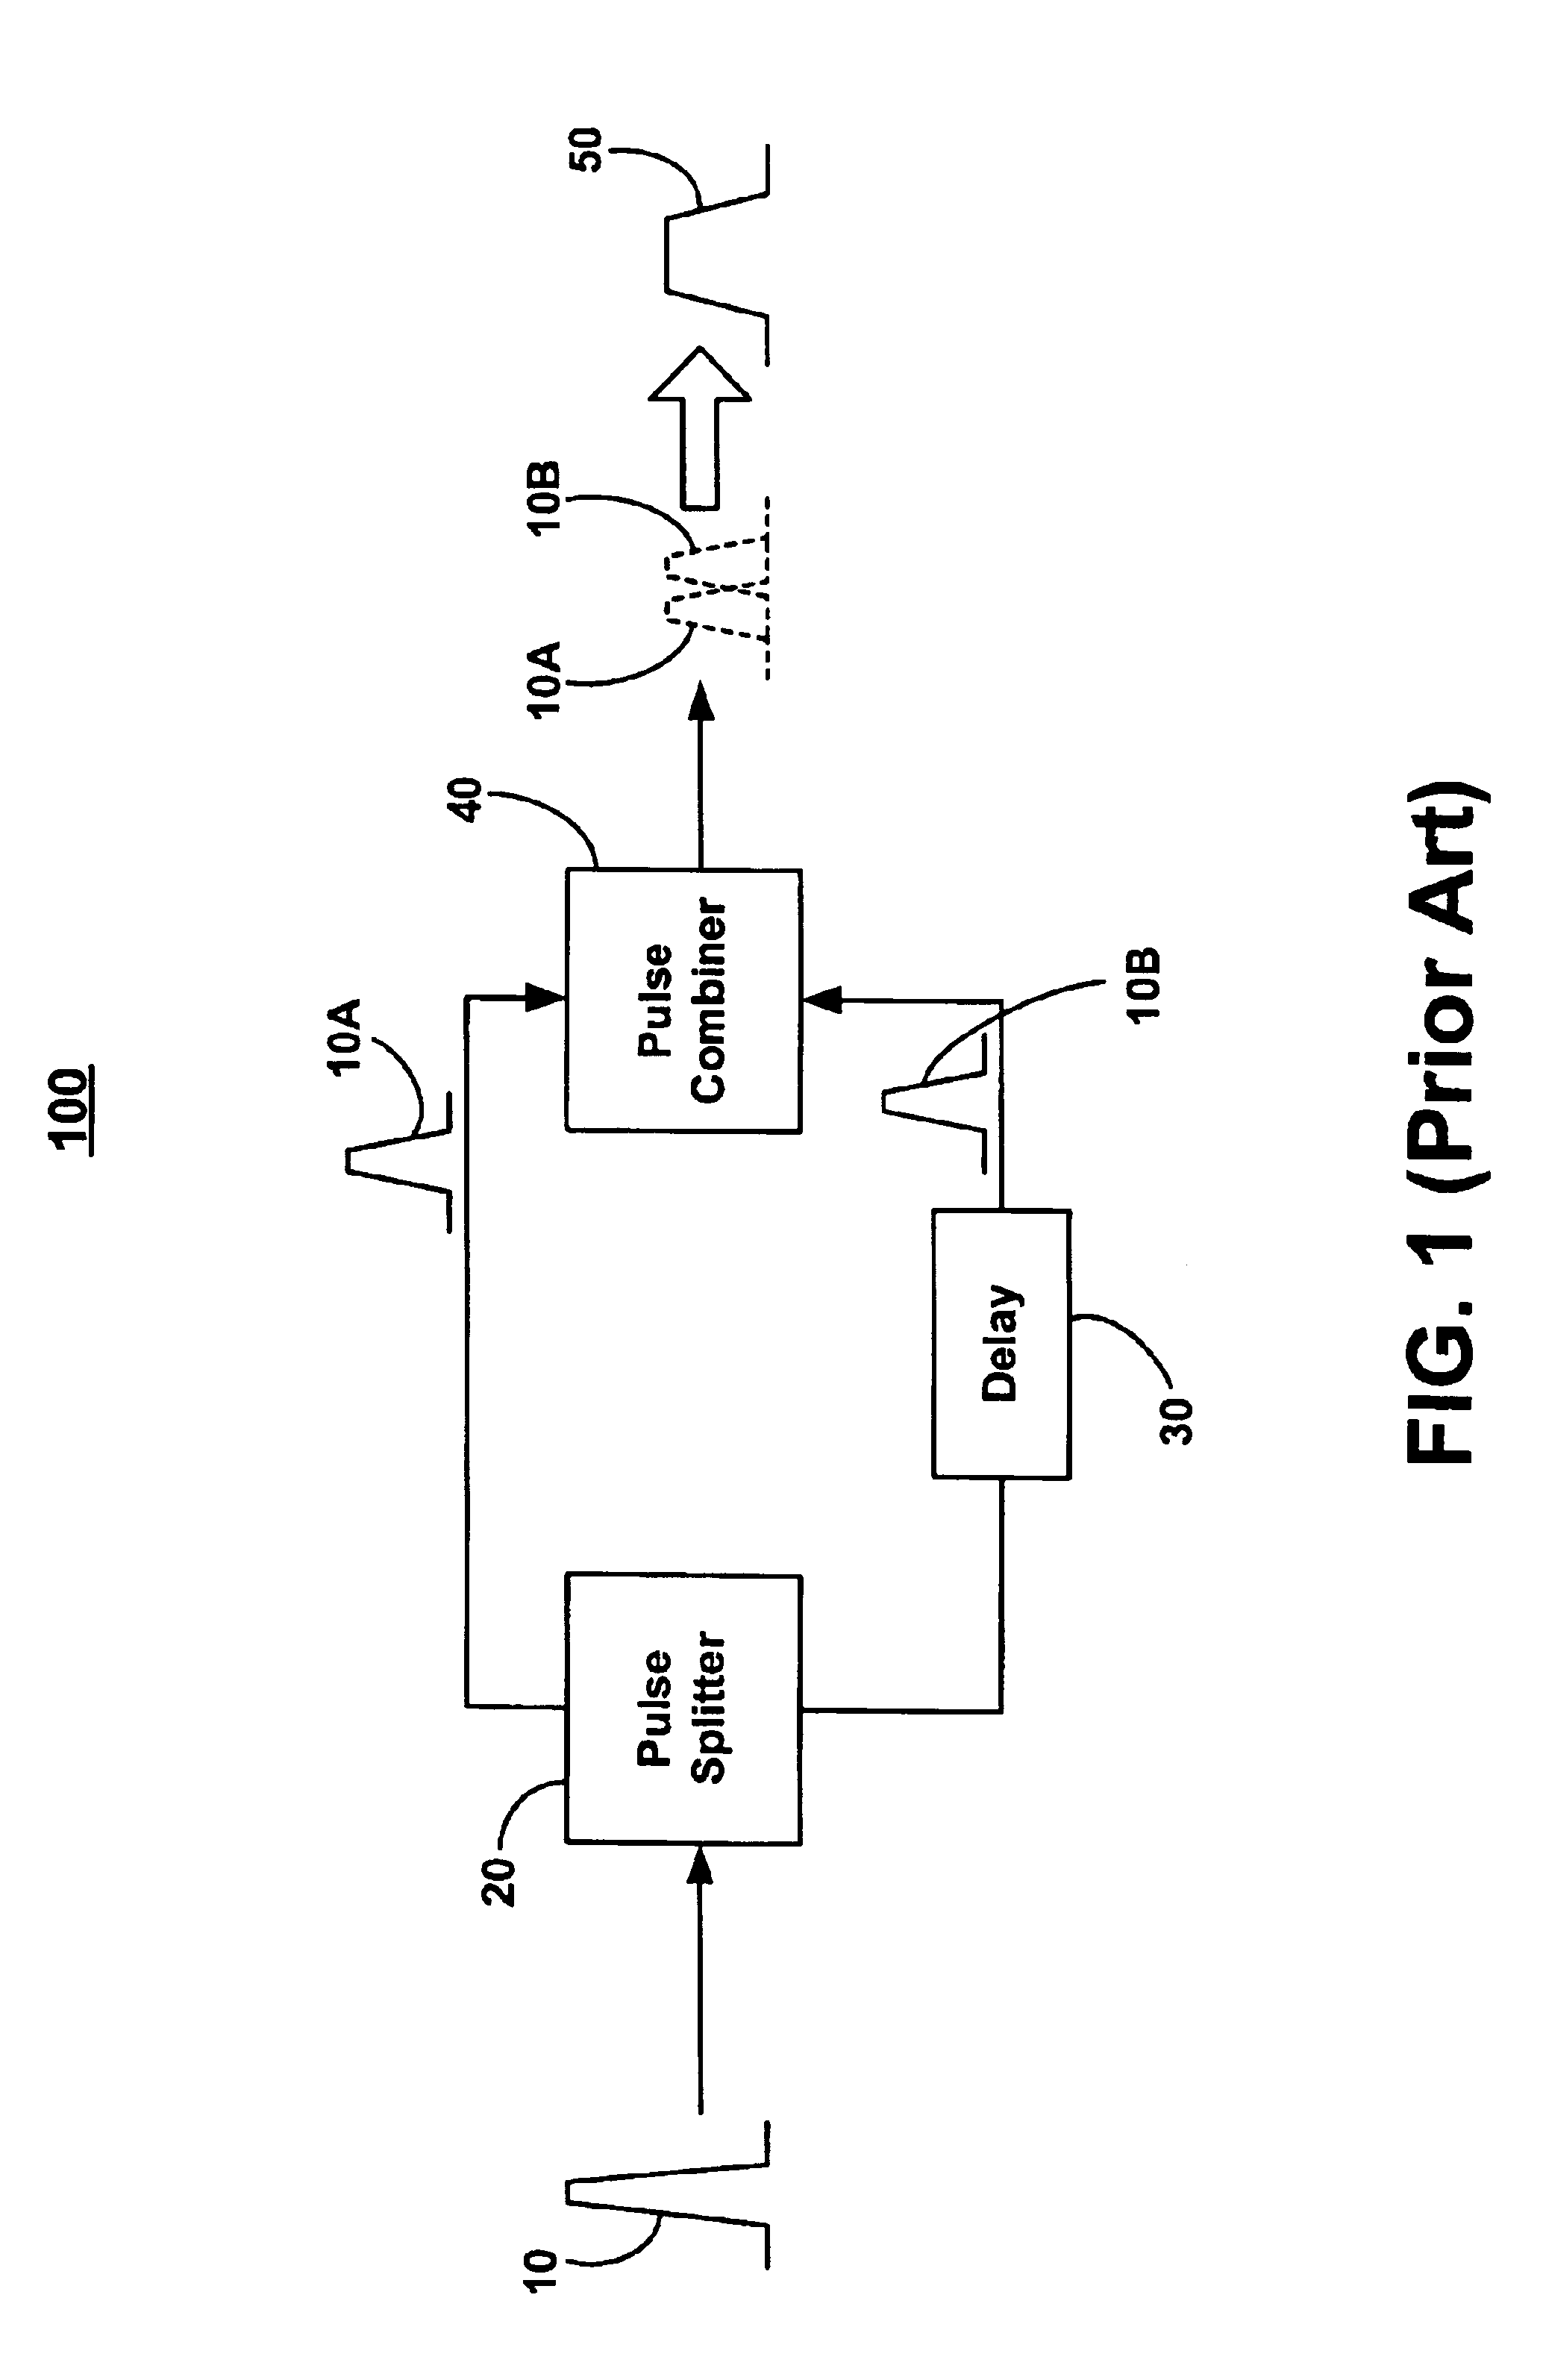 Method and system for generating low jitter NRZ optical data utilizing an optical pulse stretcher